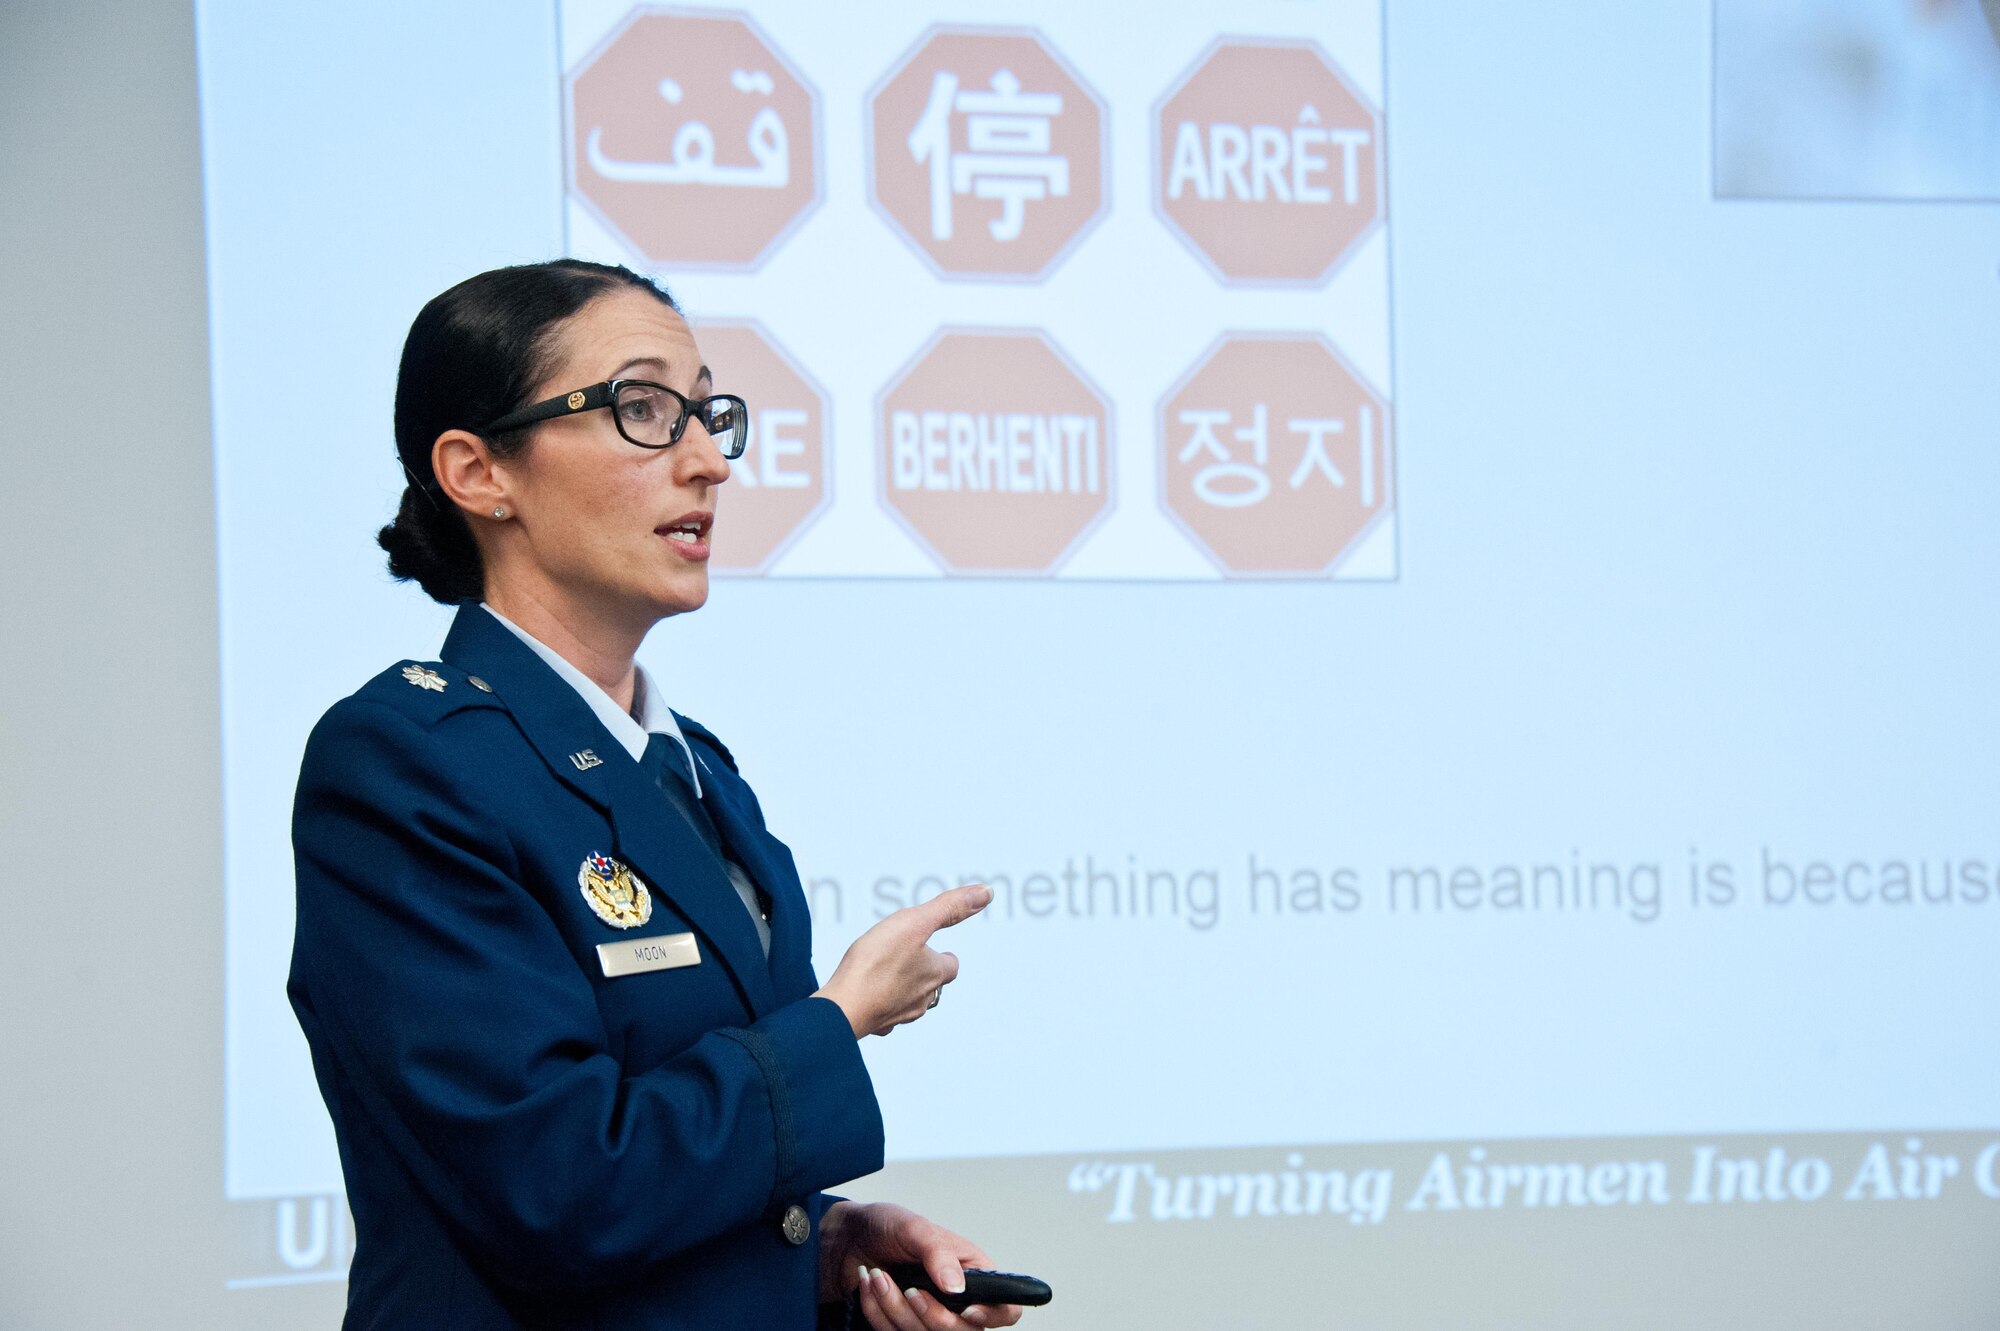 Lt. Col. Kelli Moon, Chief of the Language and Culture Center at the U.S. Air Force Special Operations School, briefs participants at the Air University Language, Regional Expertise and Culture Symposium on Maxwell Air Force Base, Ala., March 30th, 2017. Moon spoke about the five cultural dimensions and how they impact the human domain. LREC was hosted by the Air Force Culture and Language Center. (US Air Force photo by Melanie Rodgers Cox/Released)